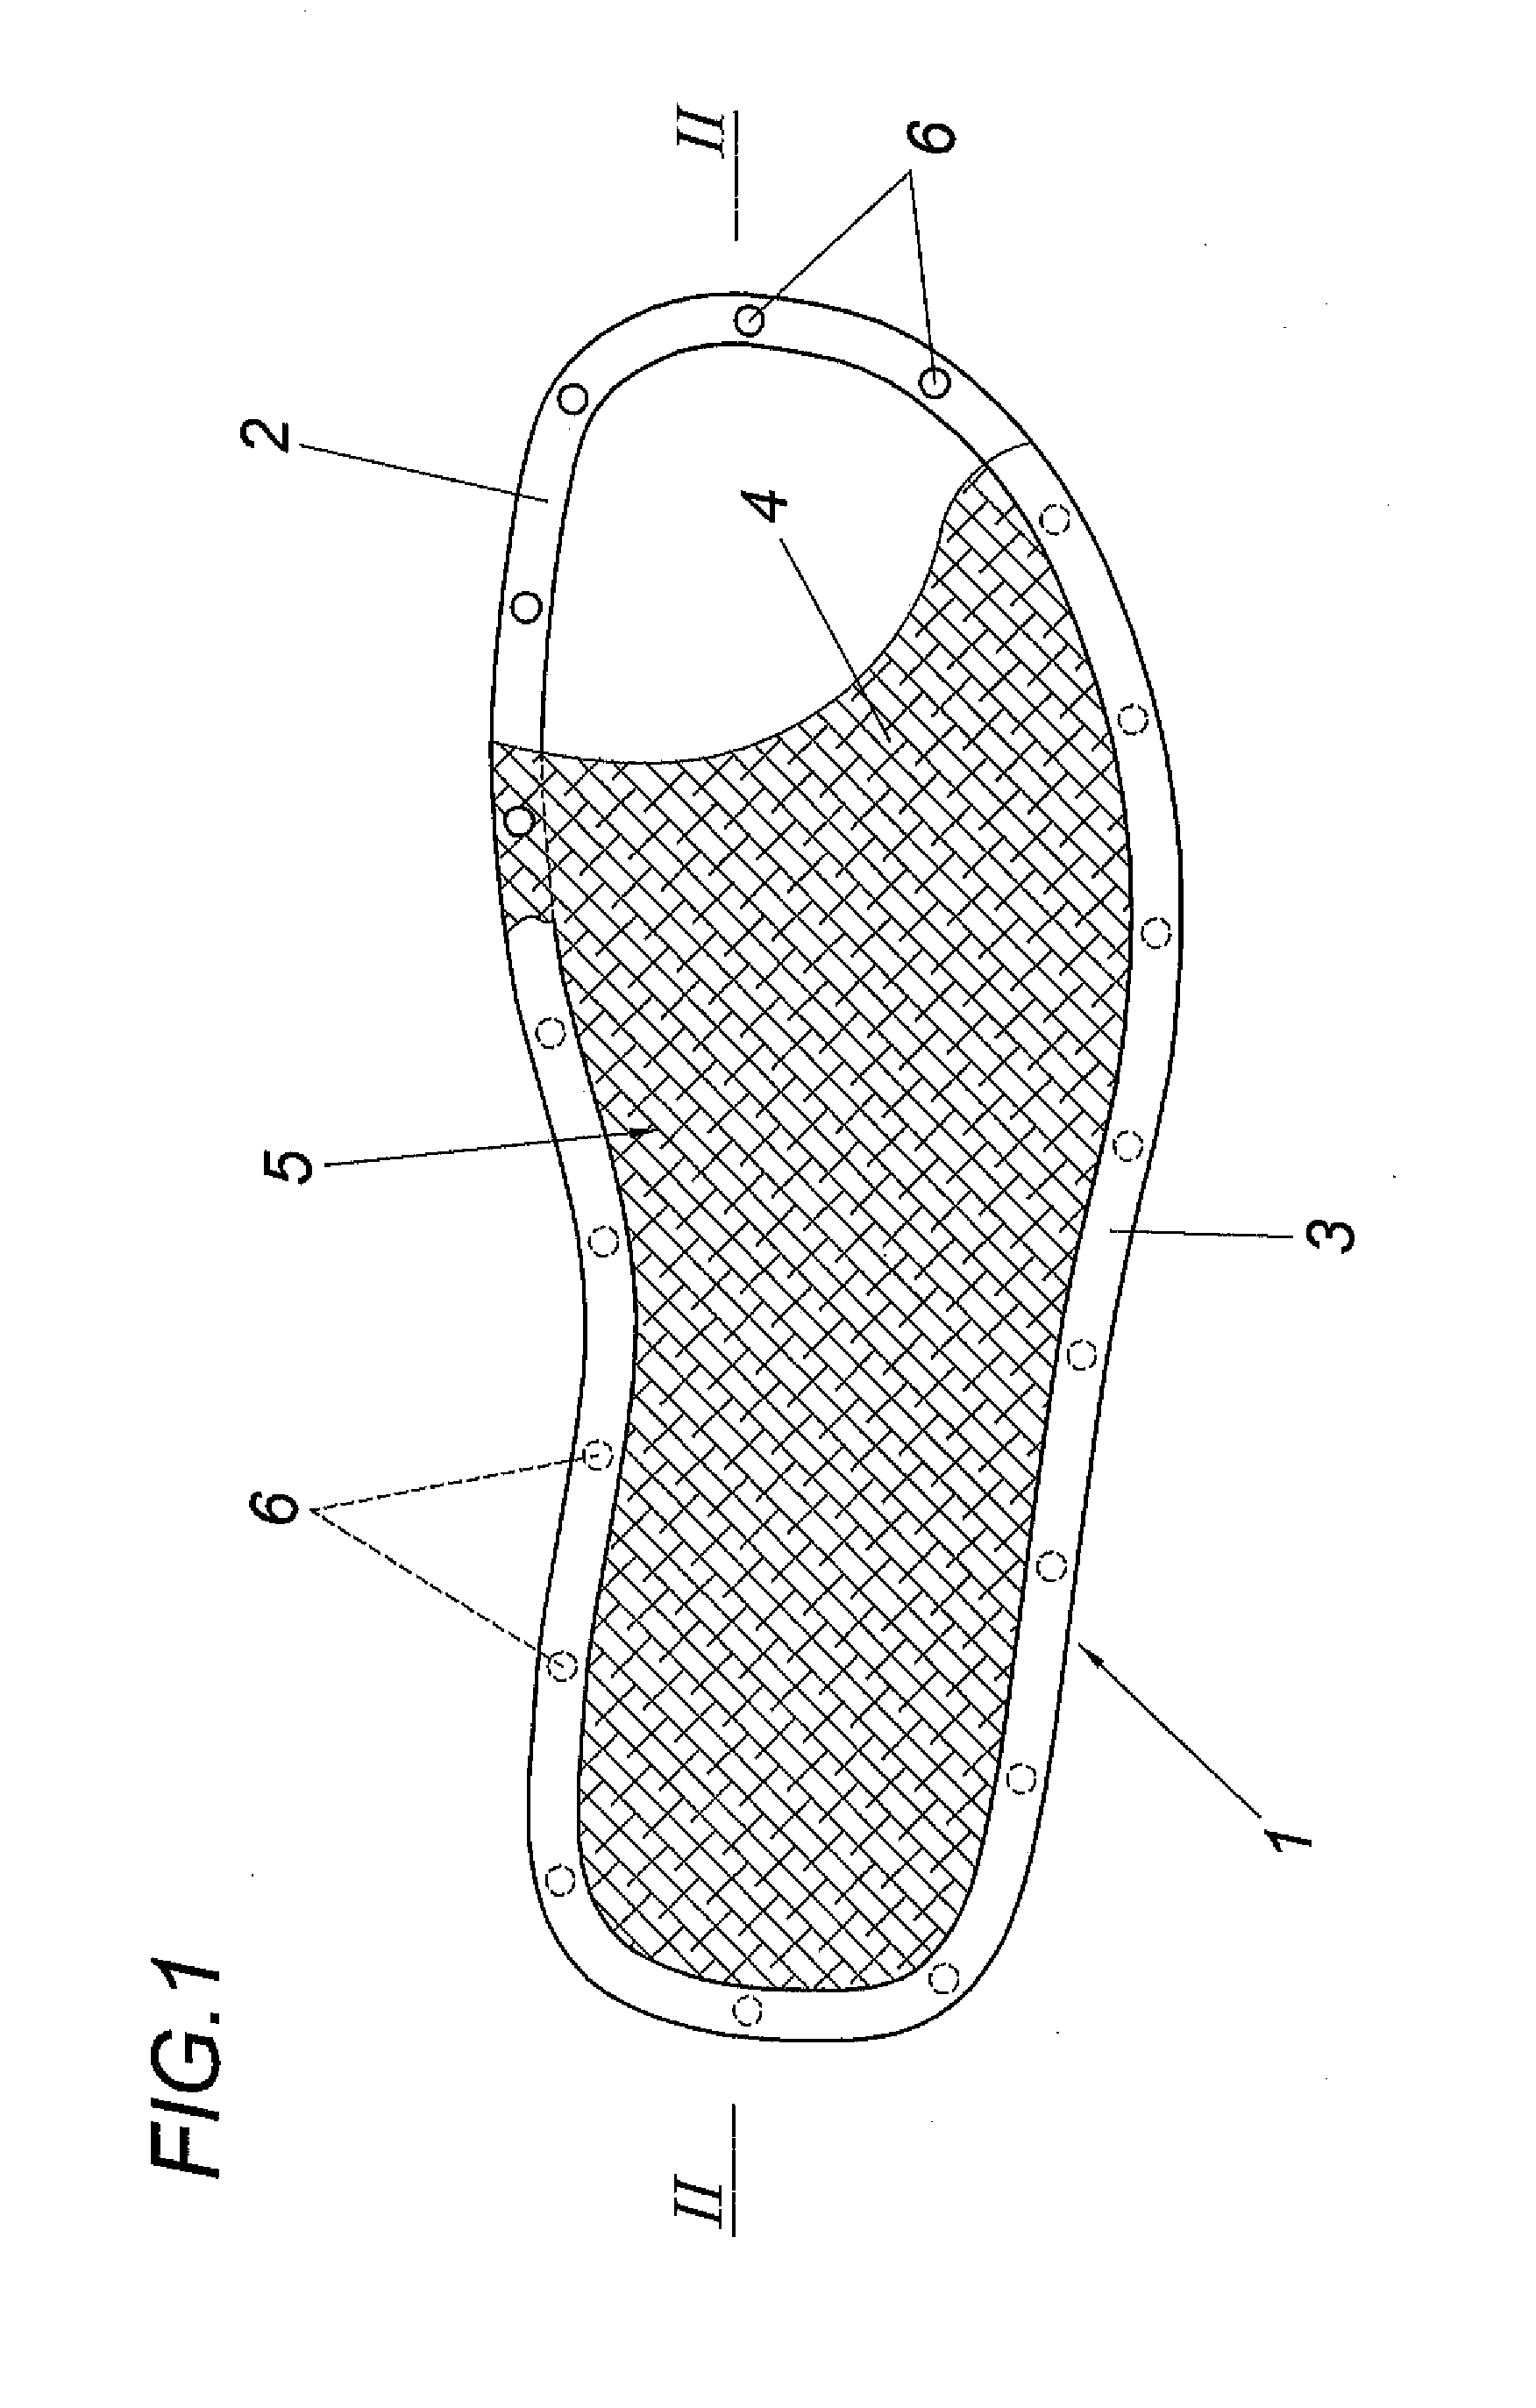 Shoe sole comprising a footbed